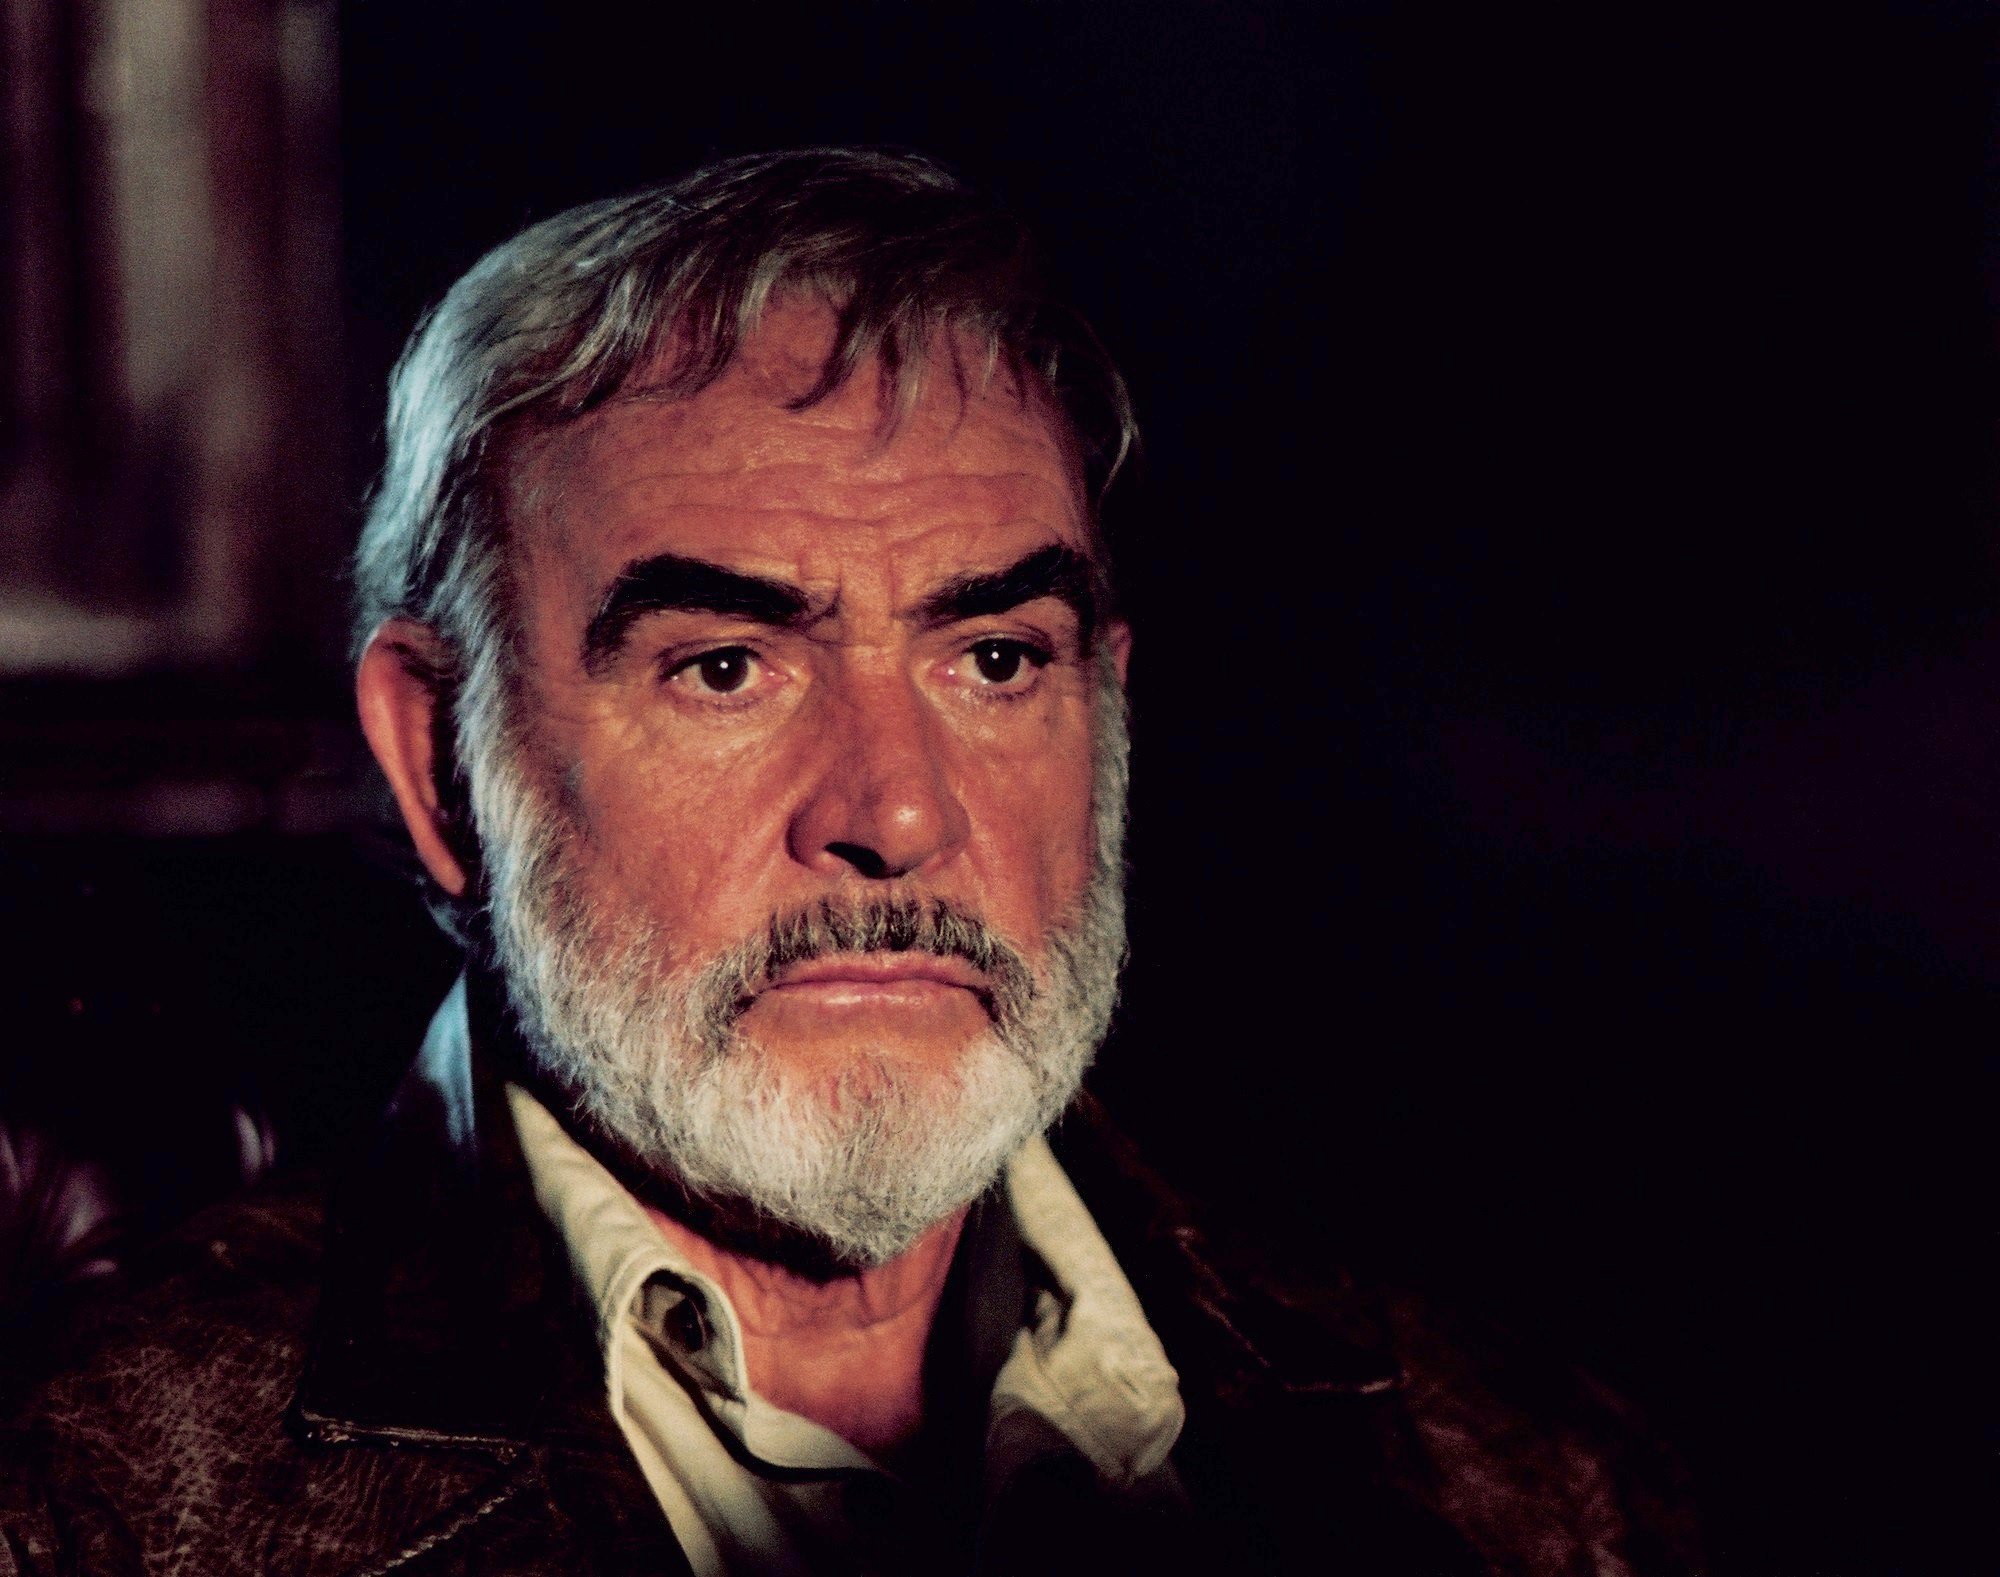 Sean Connery in LXG